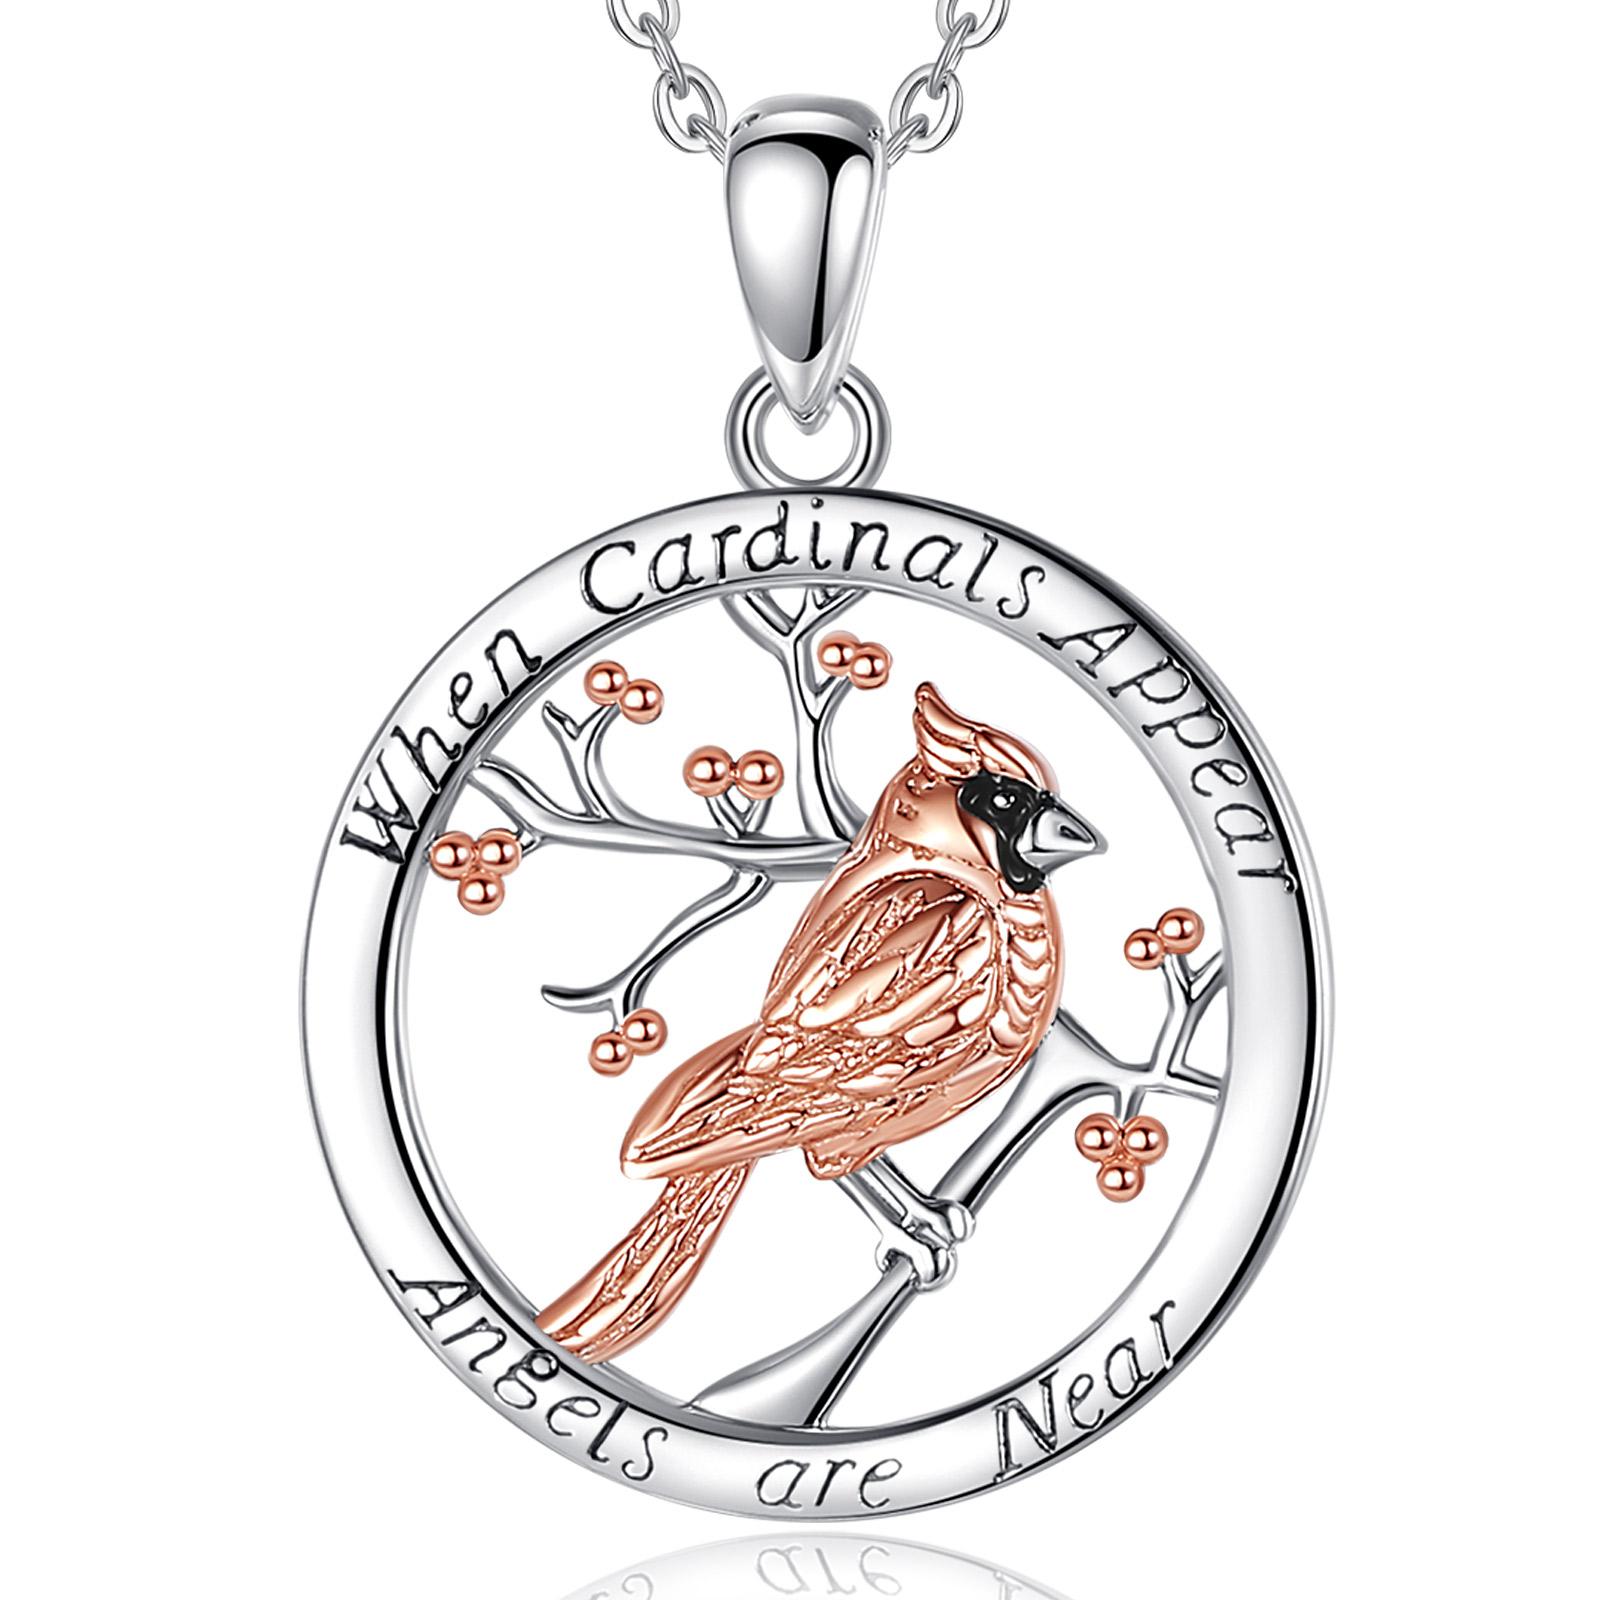 Merryshine Jewelry 925 Sterling Silver Rose Gold Plated Cardinal Bird Pendant Necklace for Women or Men